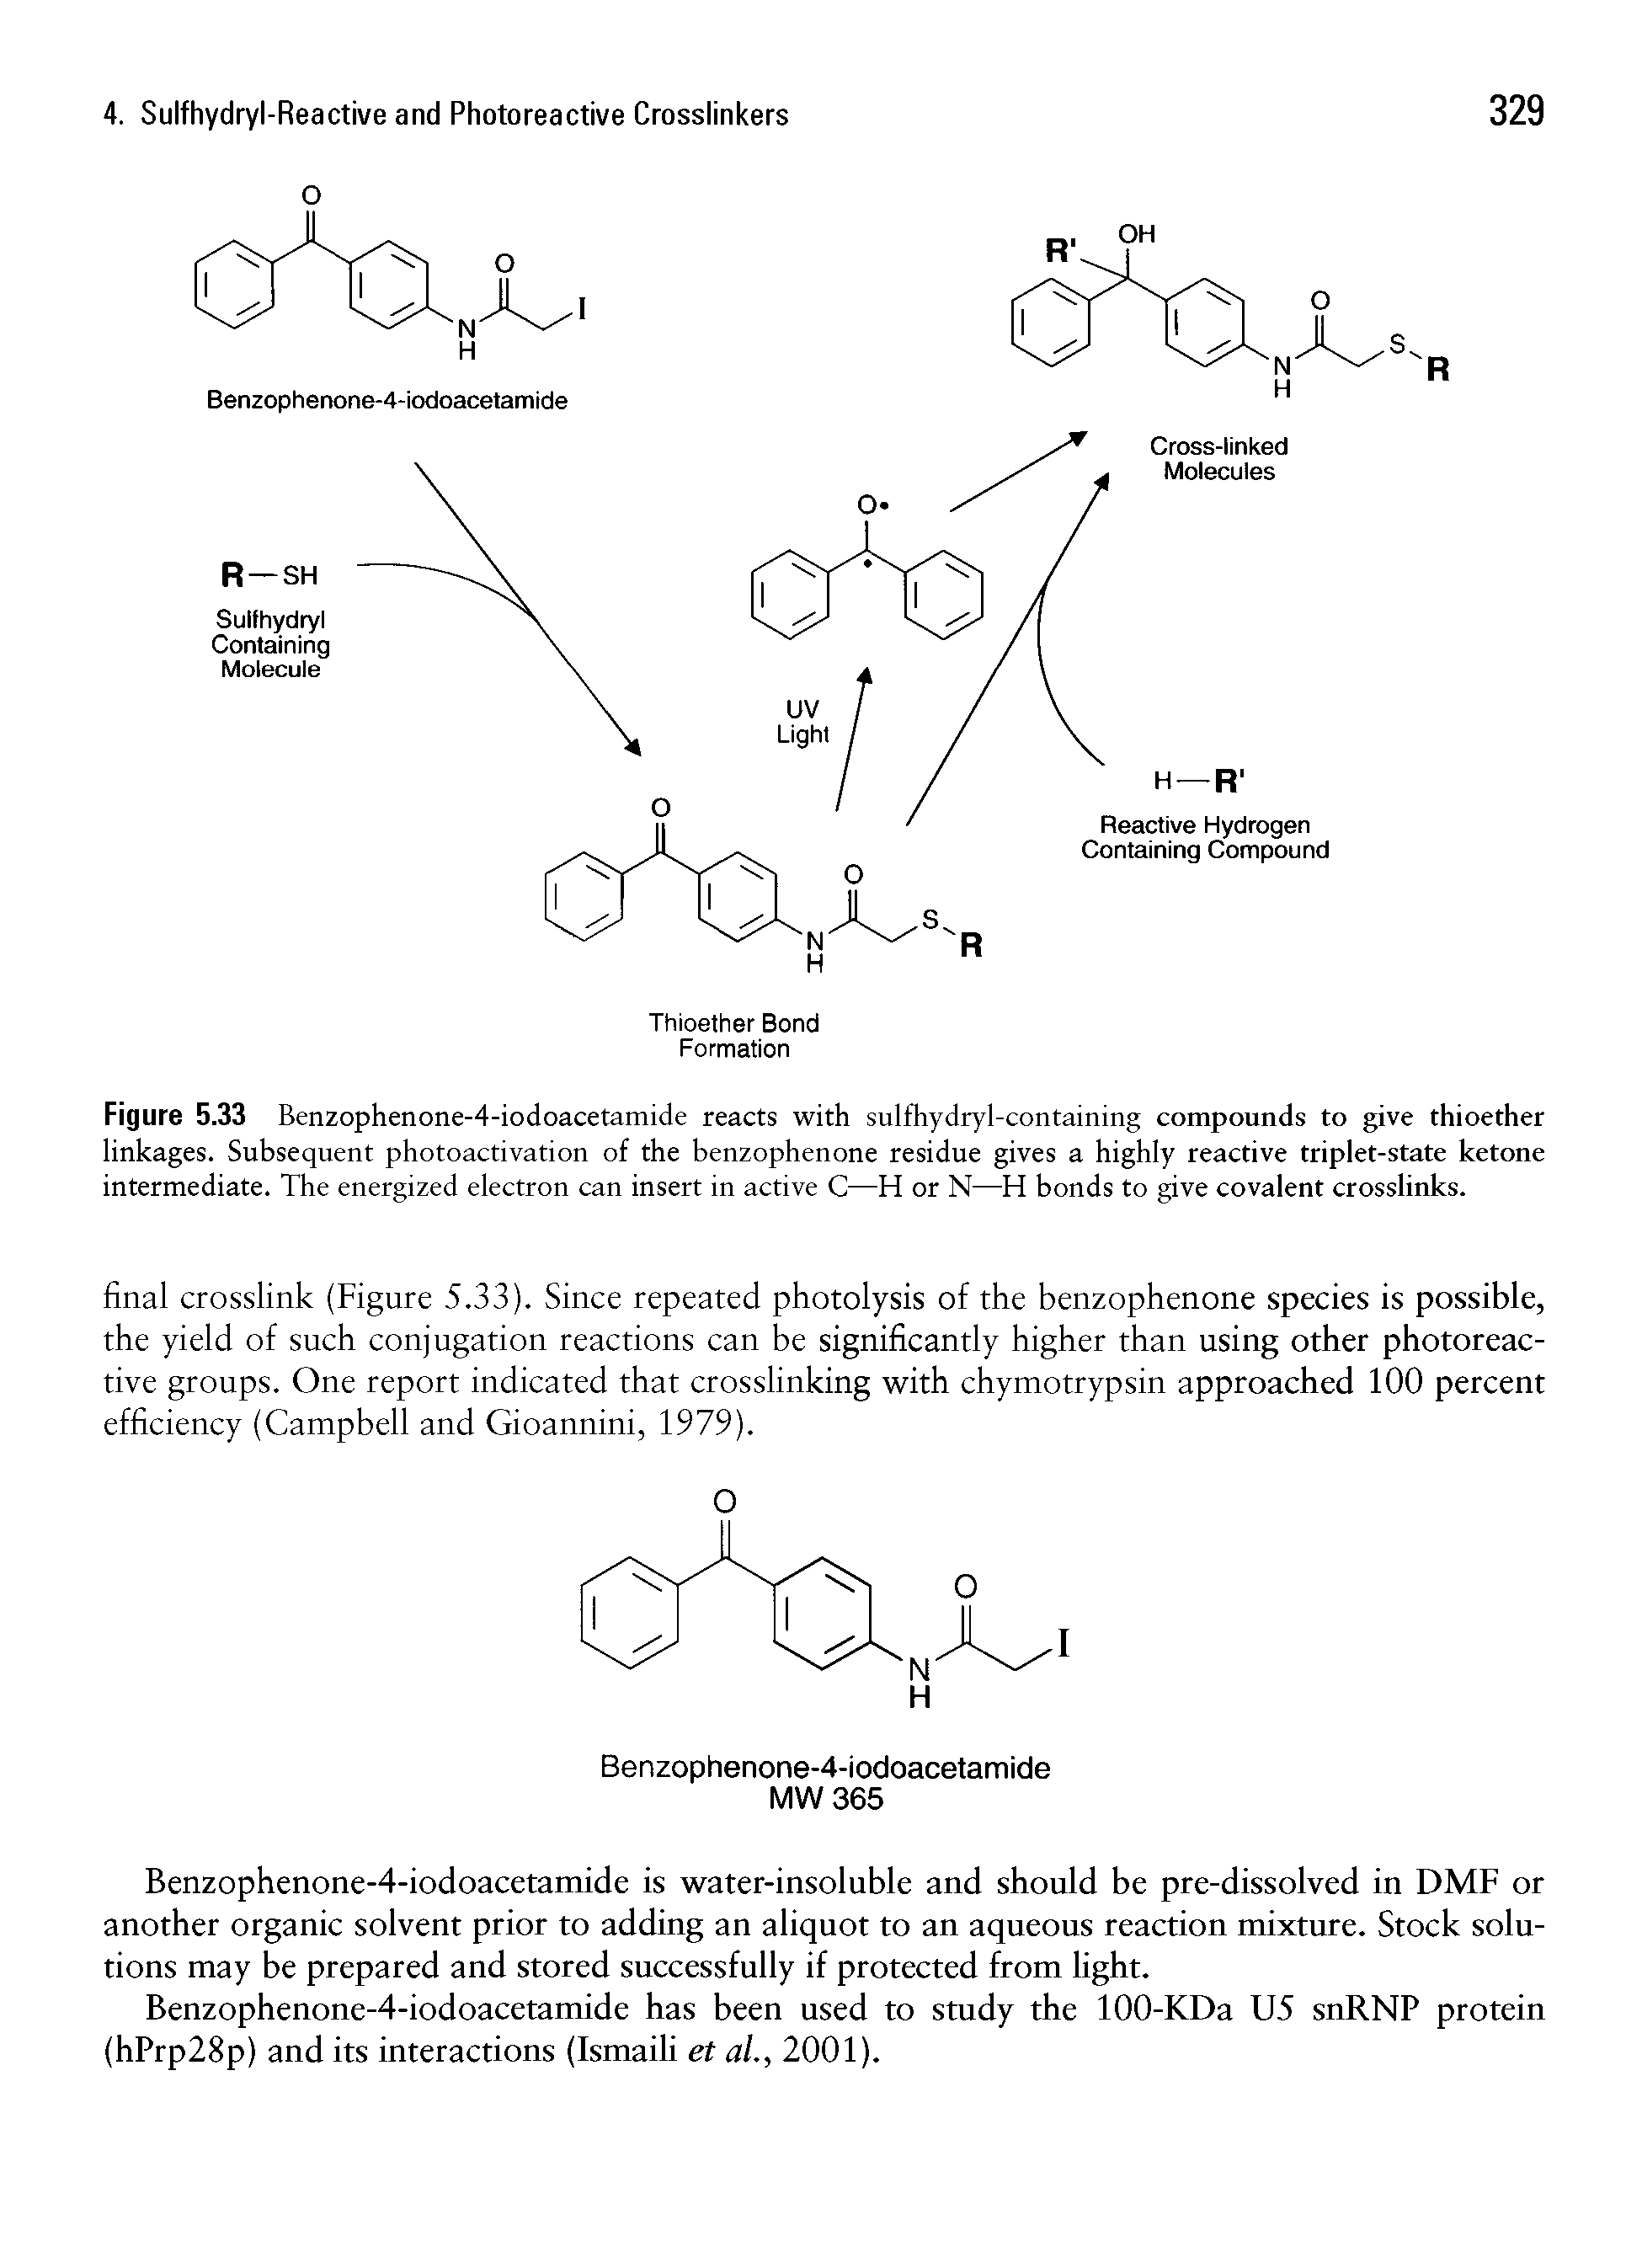 Figure 5.33 Benzophenone-4-iodoacetamide reacts with sulfhydryl-containing compounds to give thioether linkages. Subsequent photoactivation of the benzophenone residue gives a highly reactive triplet-state ketone intermediate. The energized electron can insert in active C—H or N—H bonds to give covalent crosslinks.